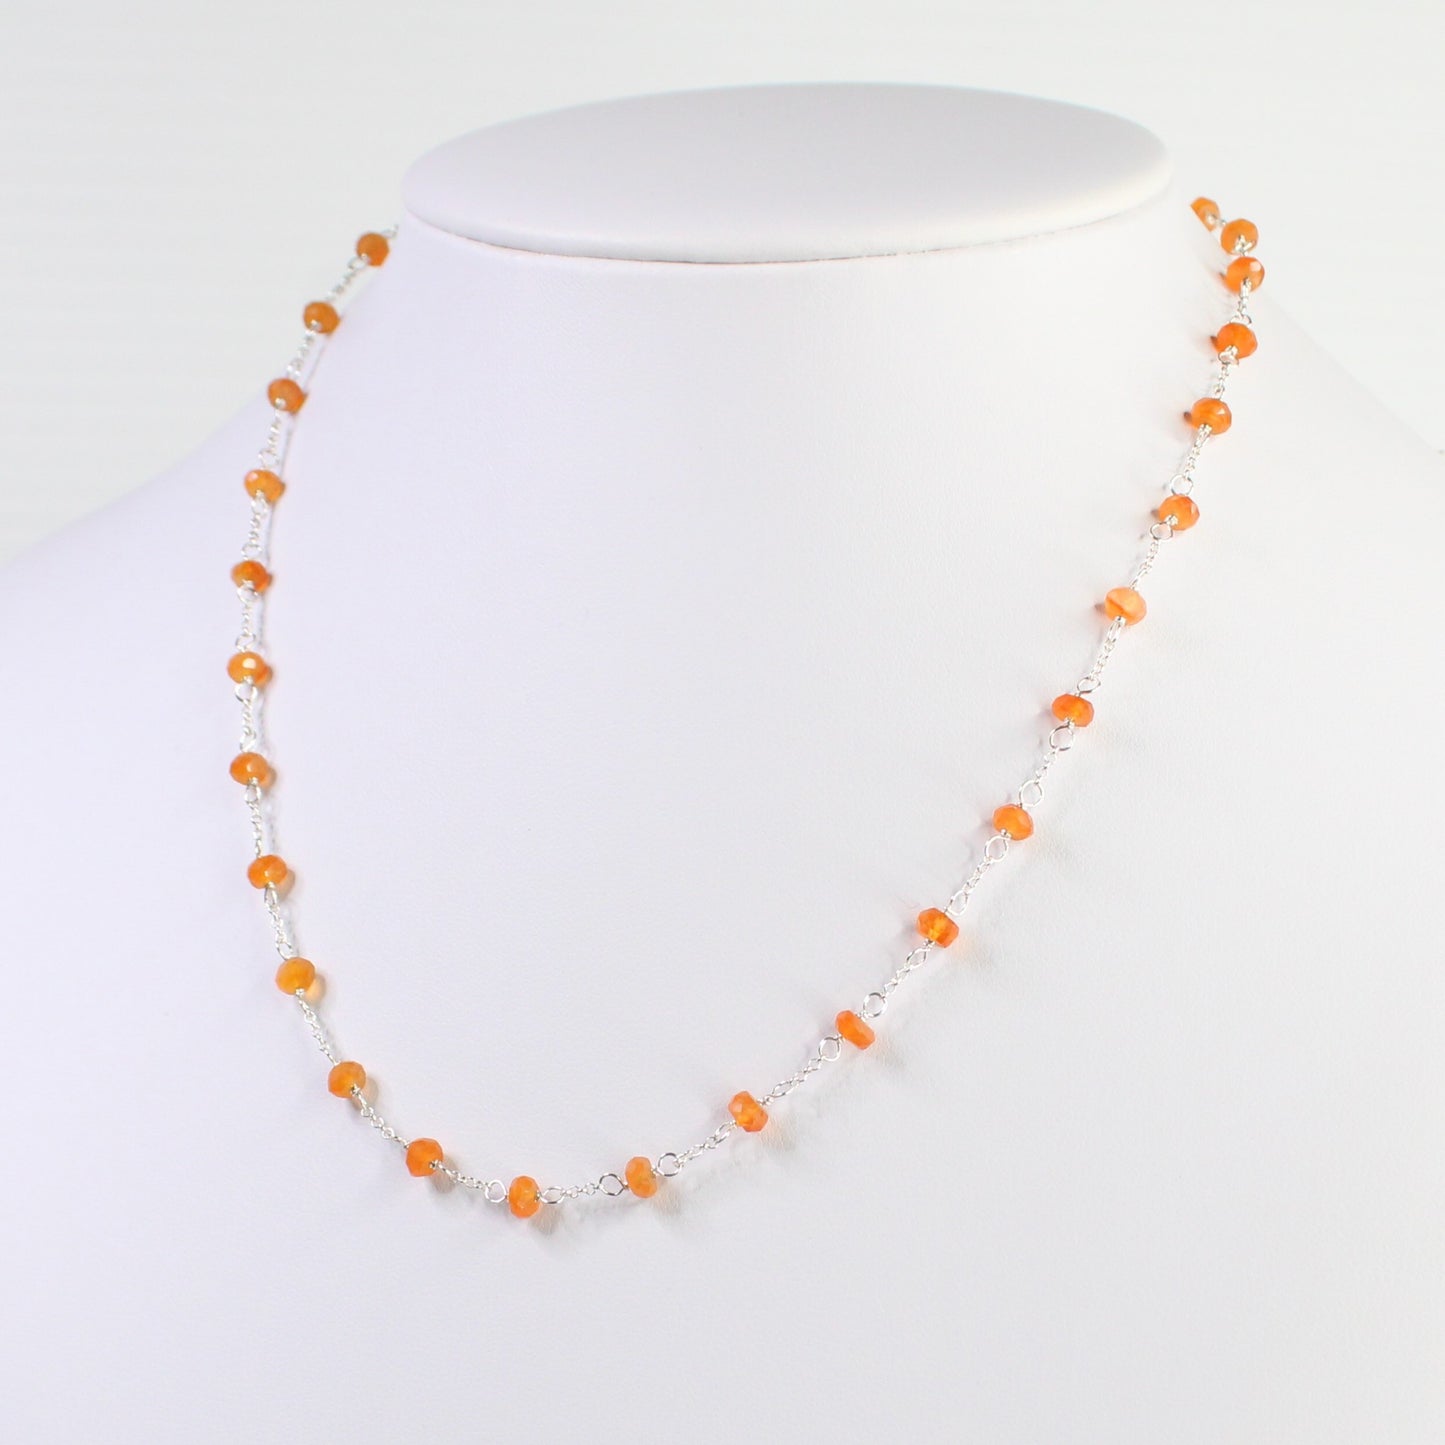 Carnelian Satellite Chain Necklace Sterling Silver - Darby